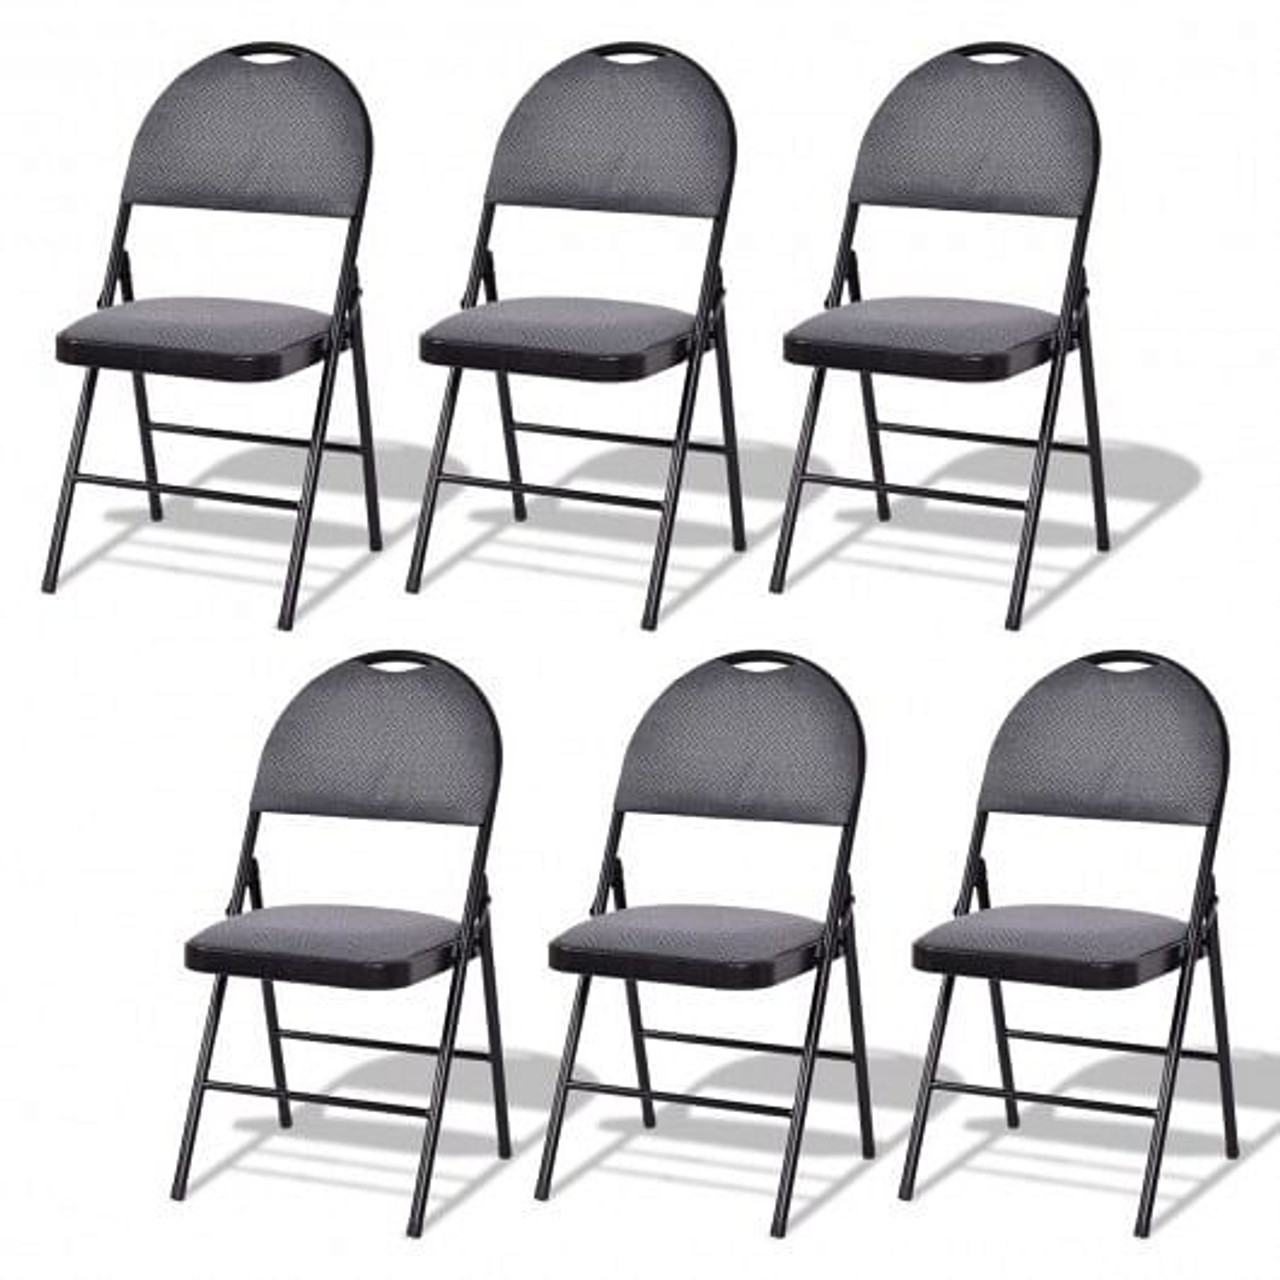 Set of 6 Folding Fabric Upholstered Metal Chairs